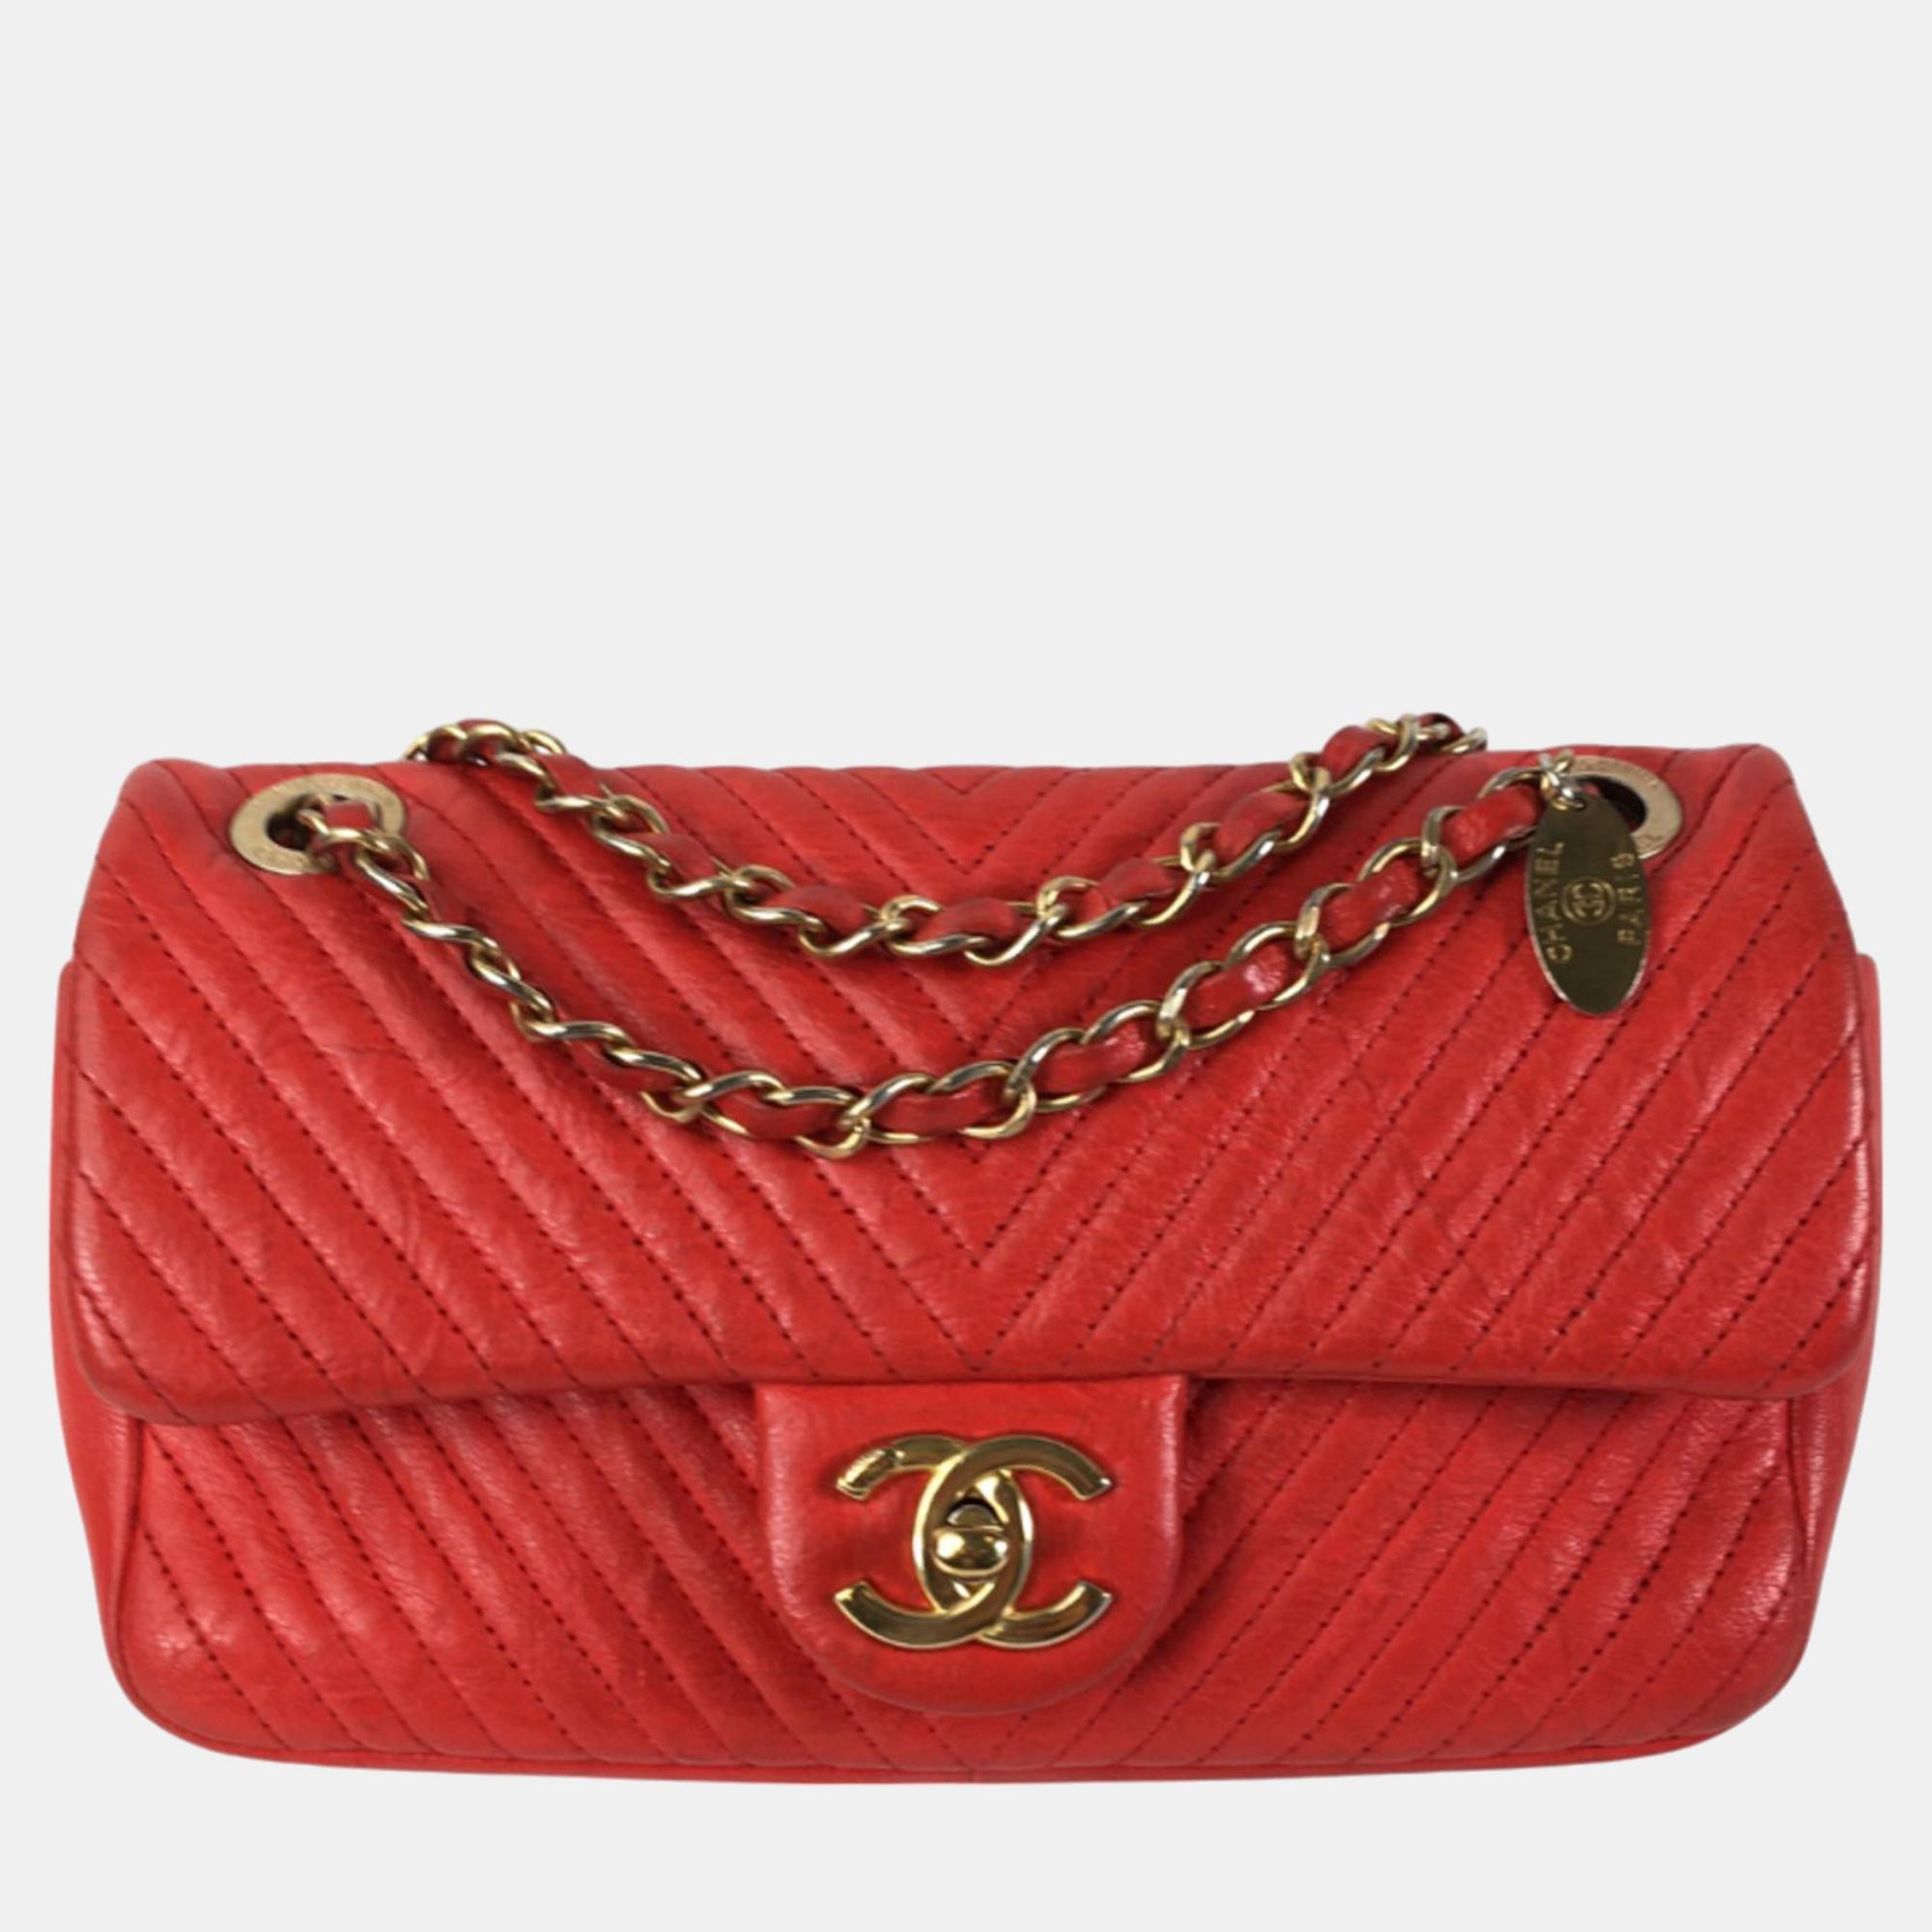 

Chanel Red Medium Wrinkled Calfskin Quilted Chevron Medallion Charm Surpique Flap